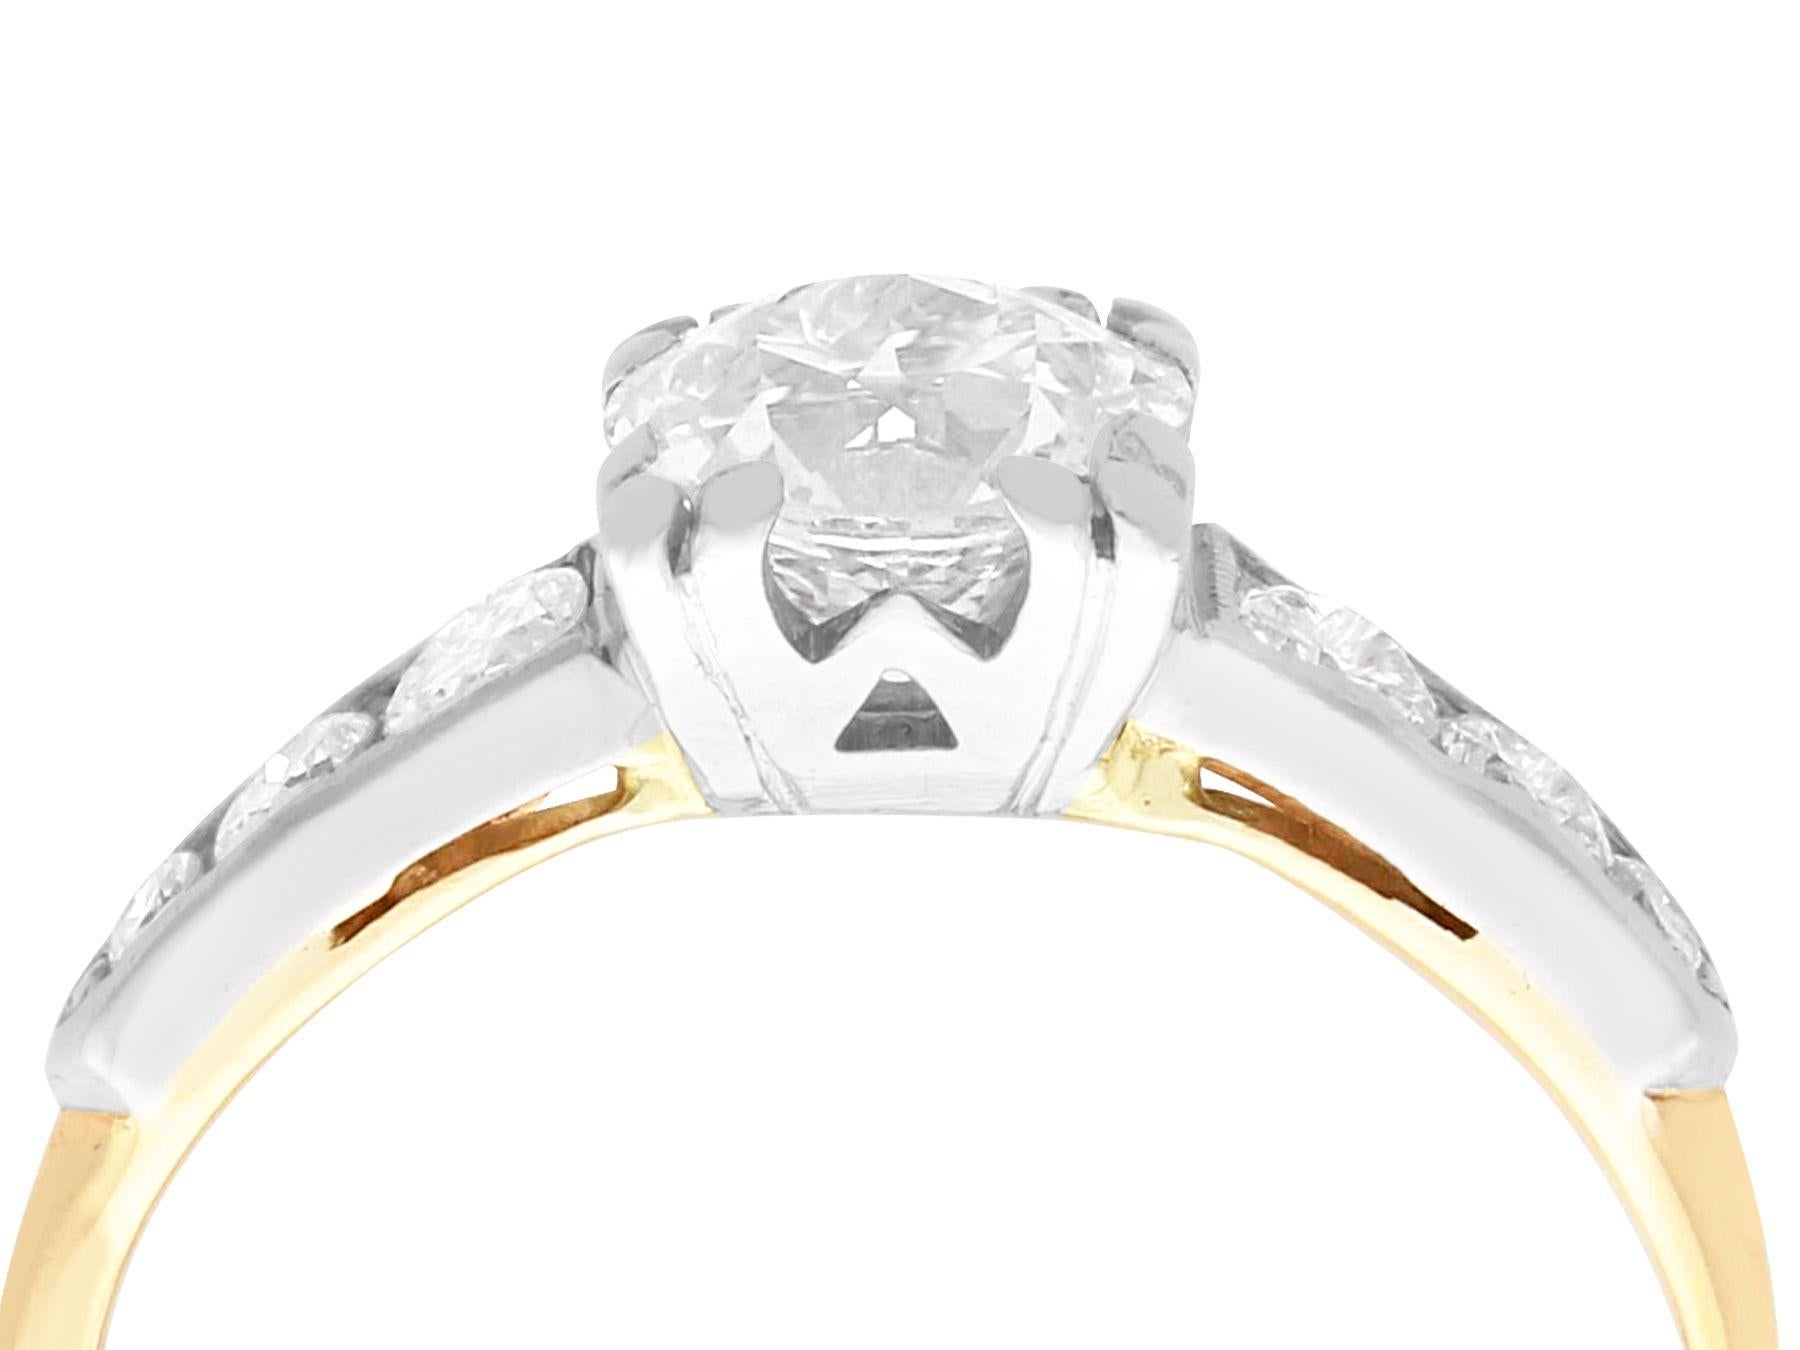 A stunning, fine and impressive 1.18 carat diamond, 12 karat yellow gold and platinum set engagement ring; part of our diverse diamond jewellery and estate jewelry collections.

This stunning, fine and impressive antique engagement ring has been